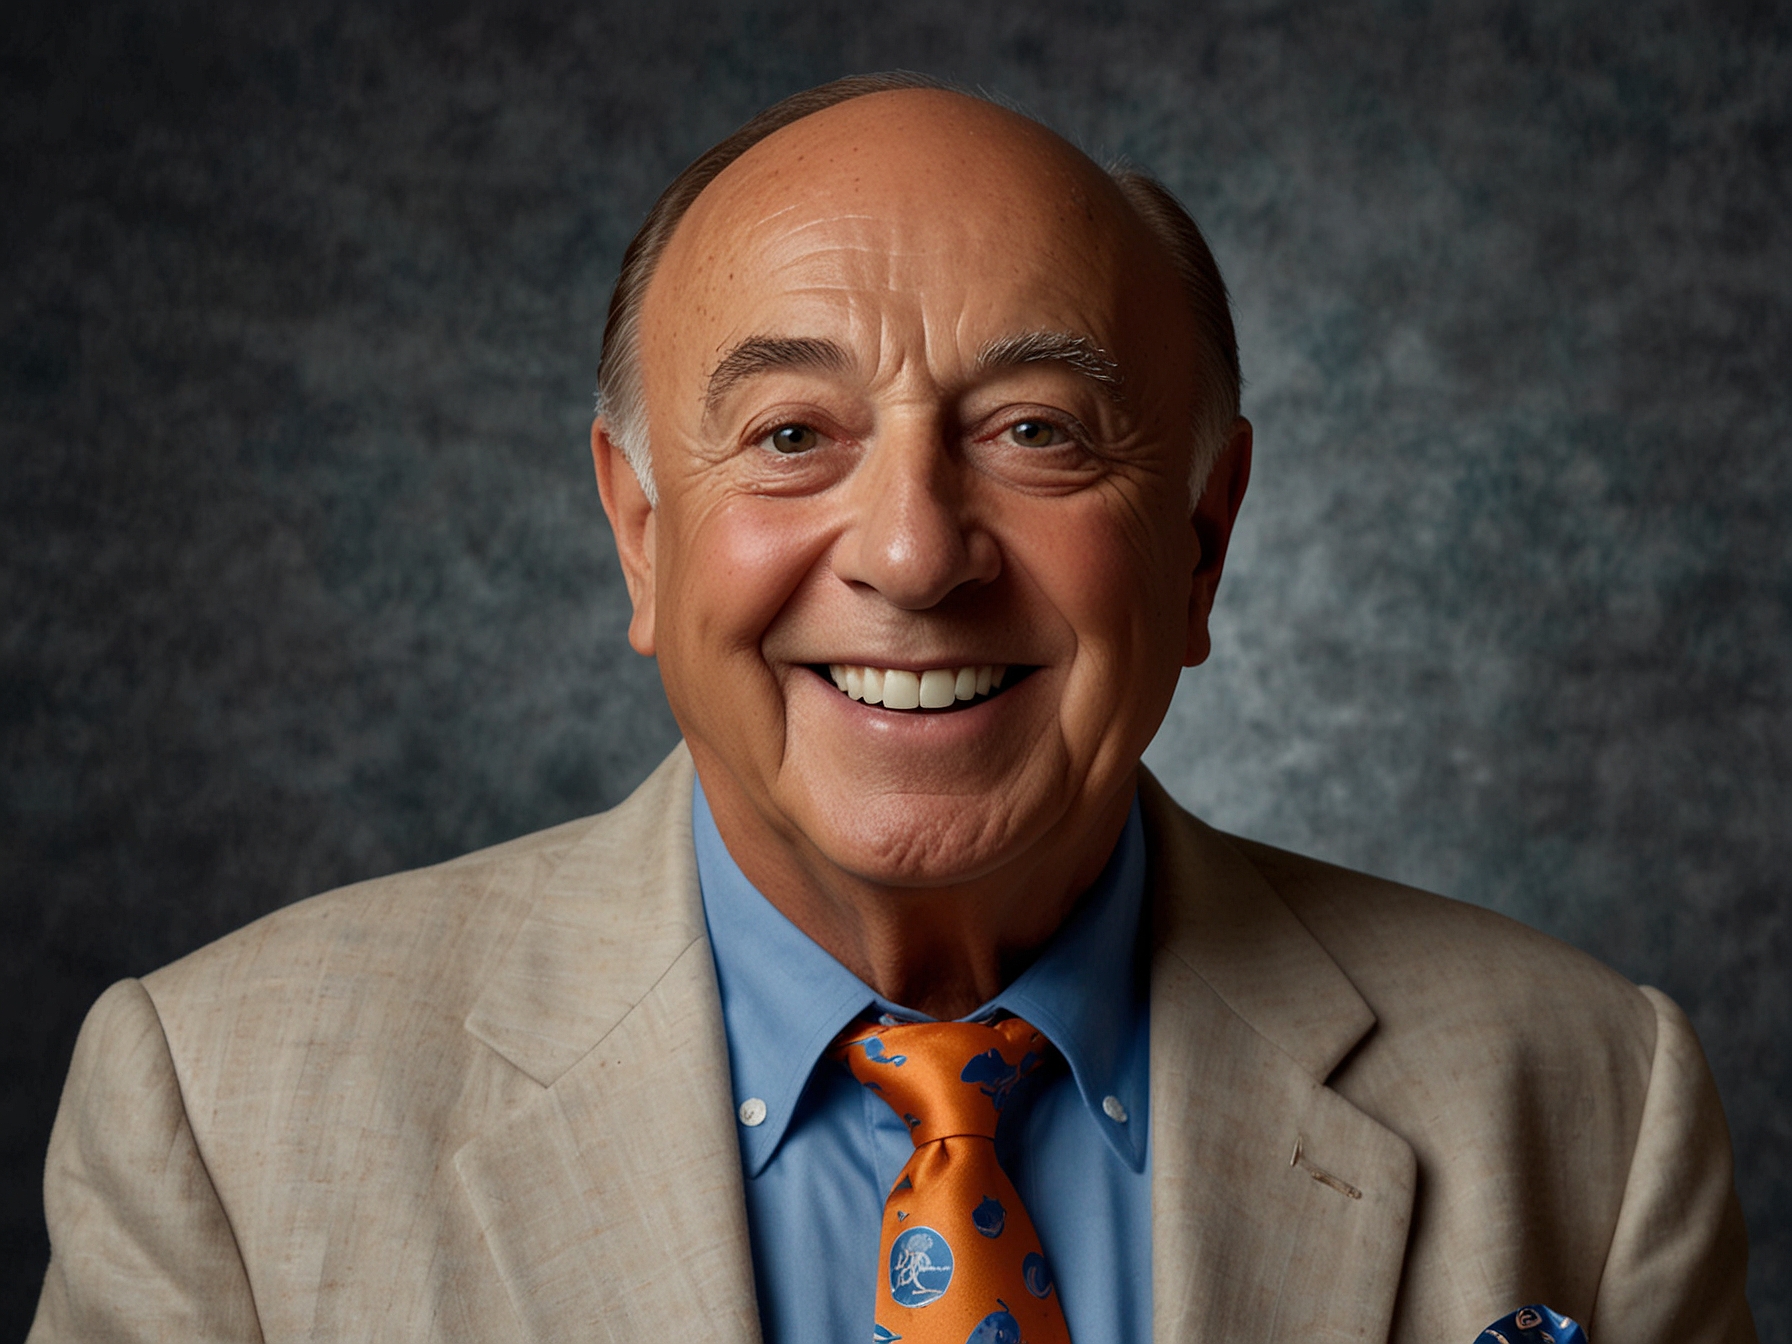 Dick Vitale, affectionately known as 'Dickie V,' poses with a vivid smile, exuding his trademark enthusiasm and passion for college basketball, in front of an ESPN backdrop.